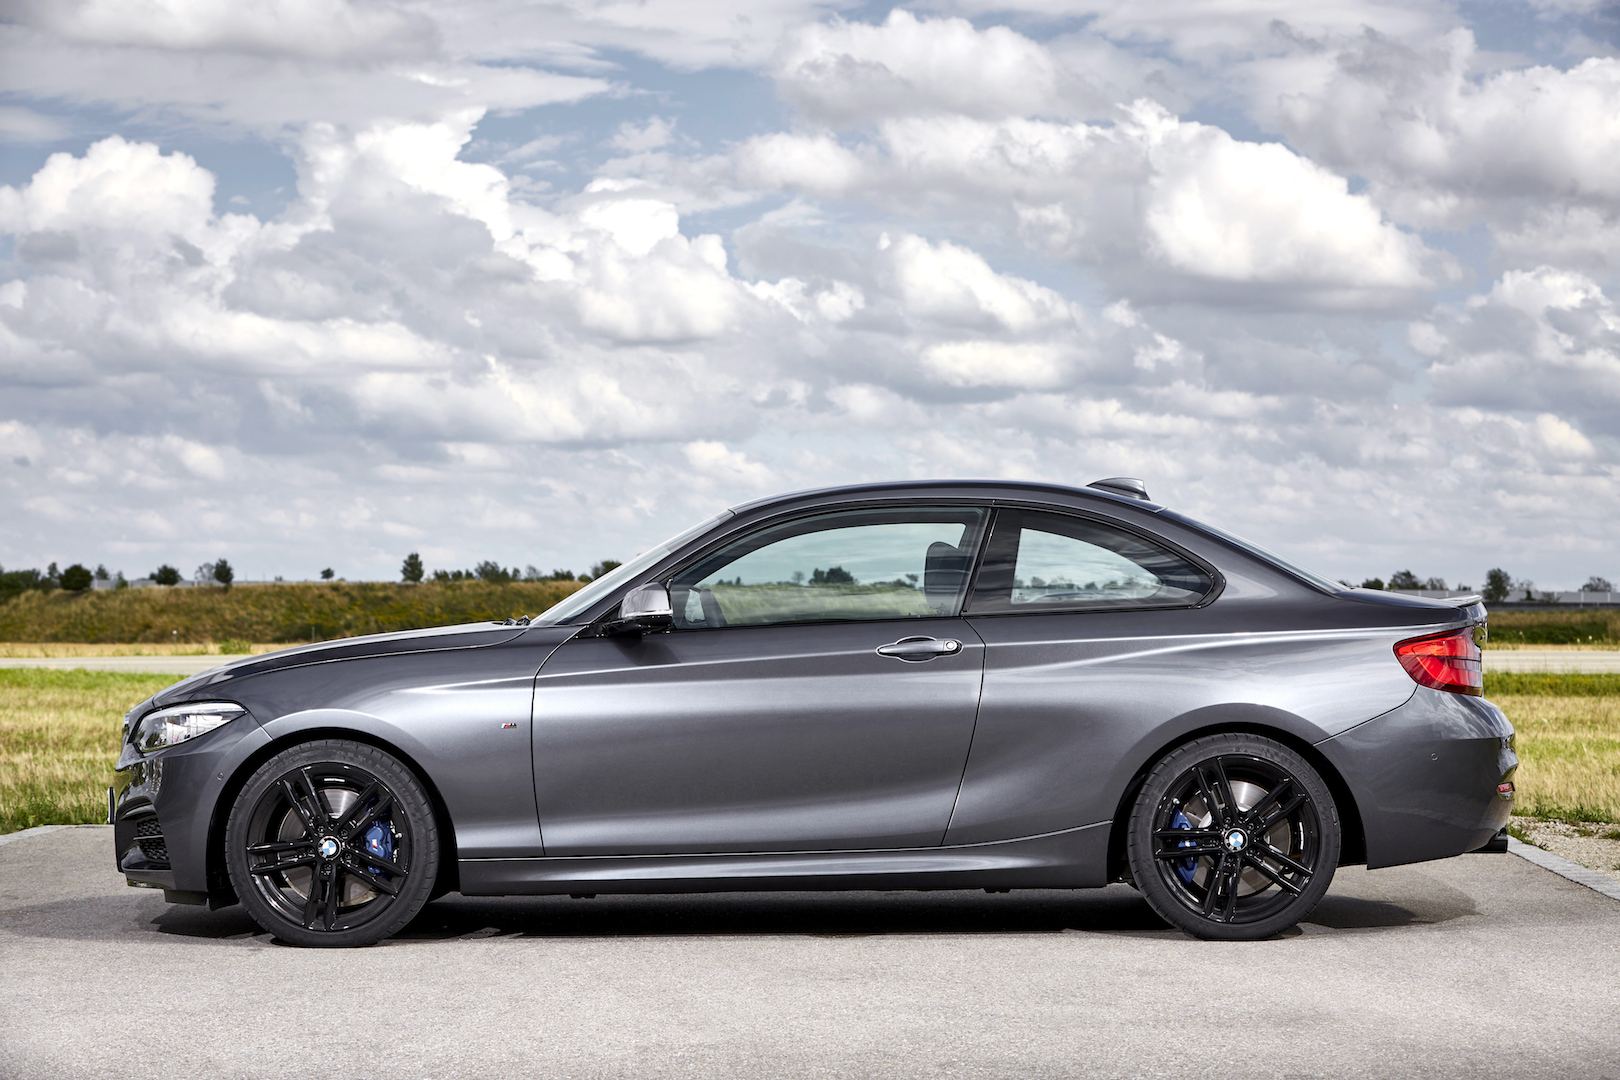 2018 BMW M240i Test Drive Review: By BMW Standards, a Performance Bargain